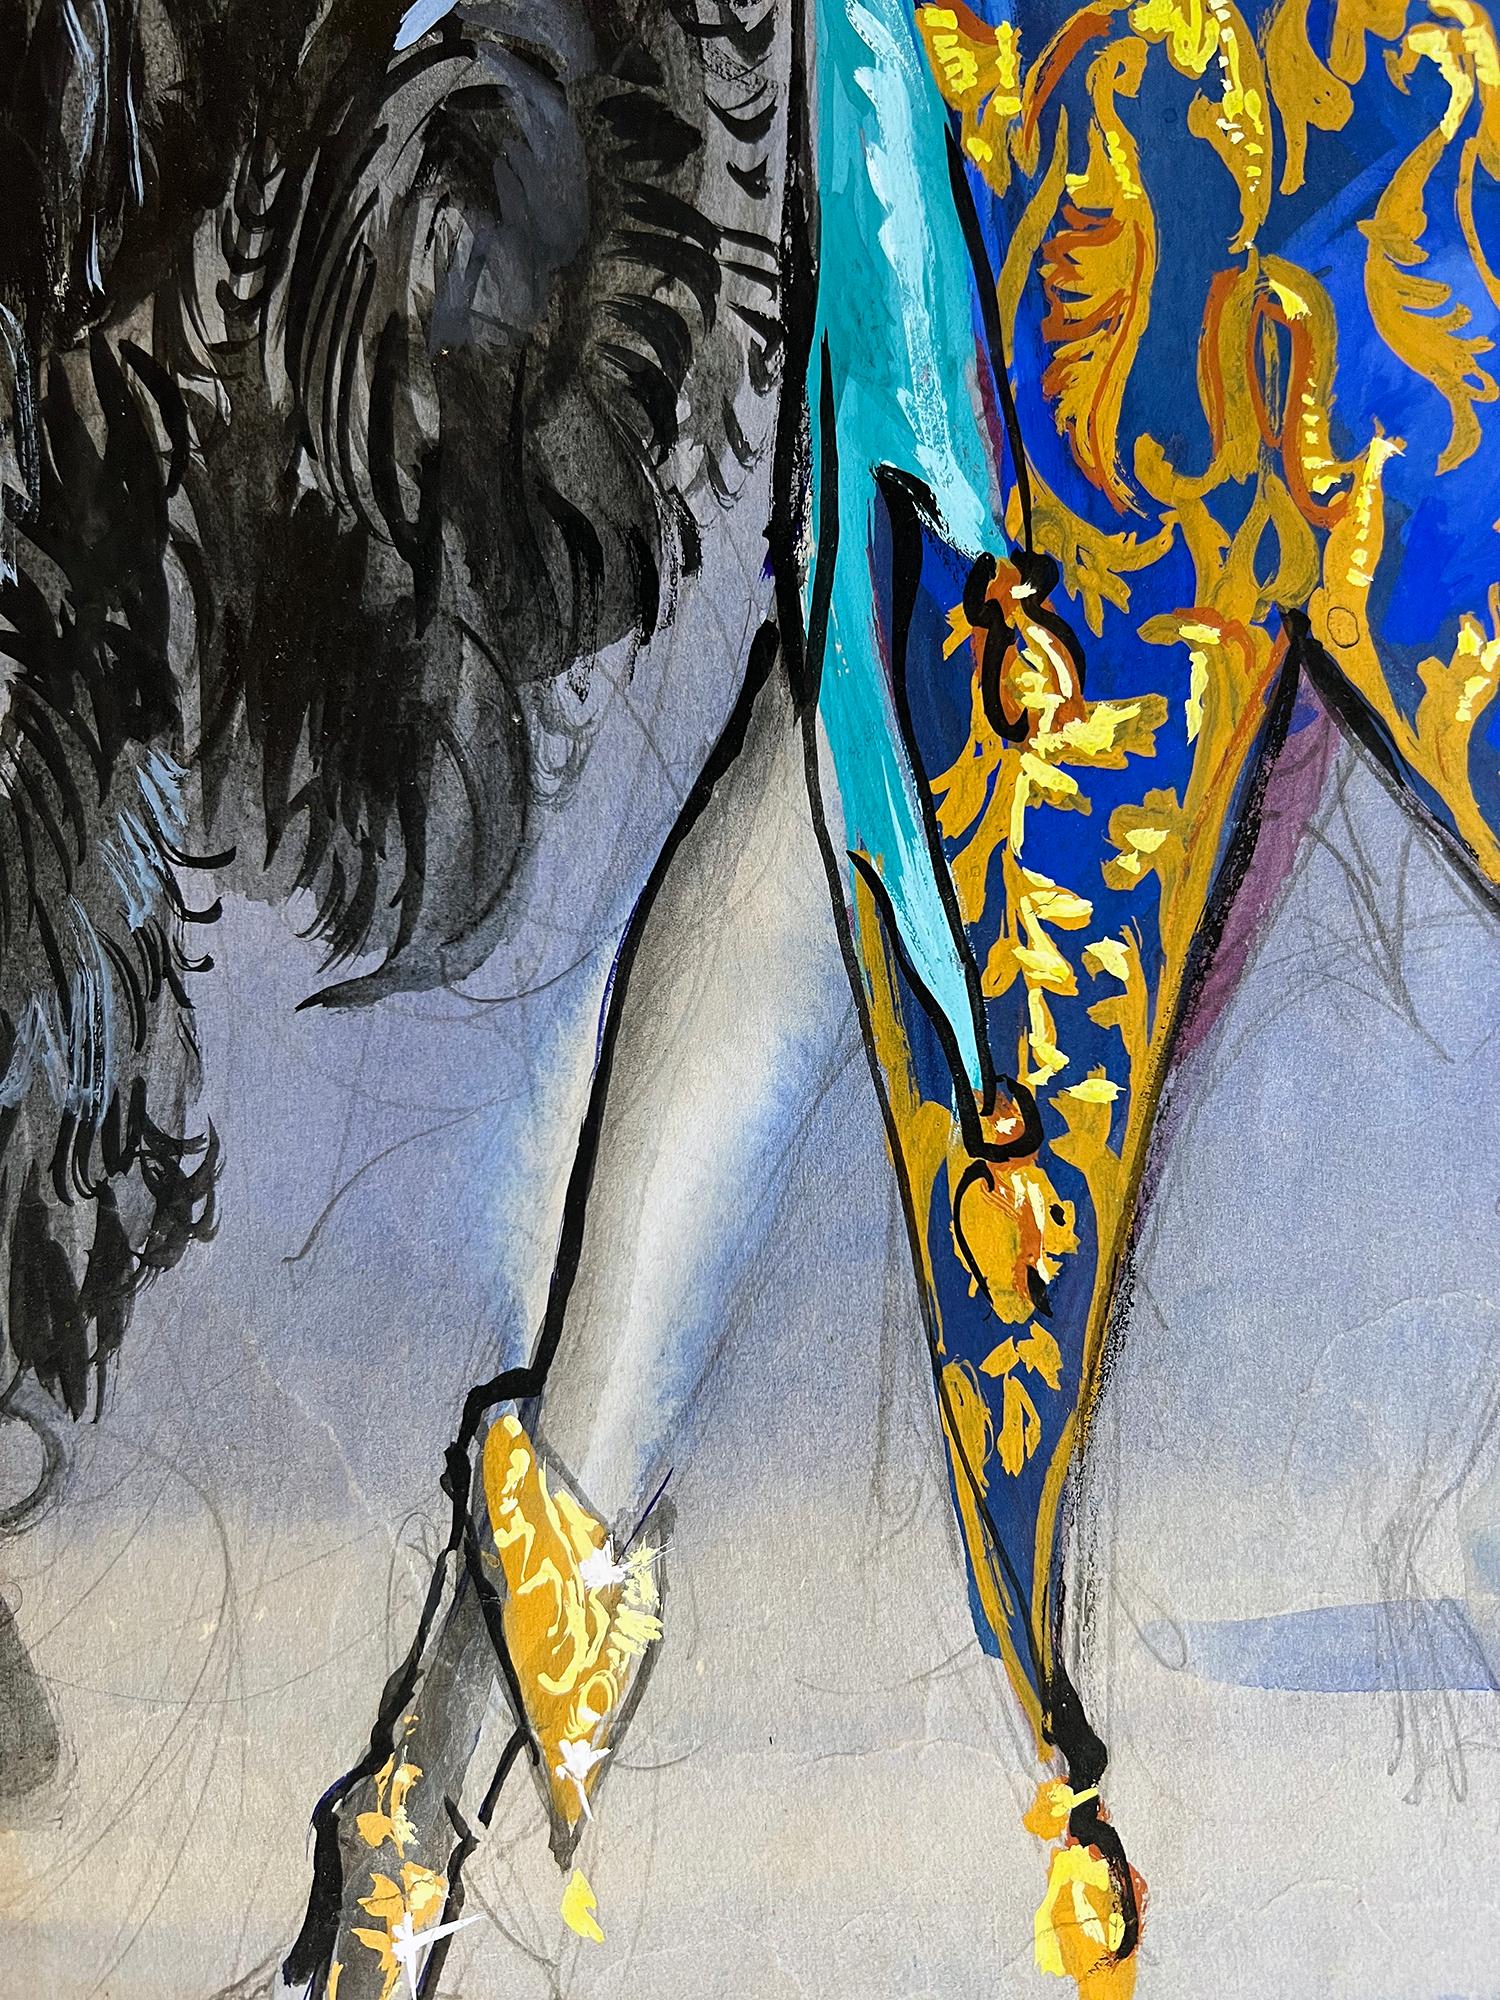 Show Girl with Fantasy Horse, Fashion Illustration in Blue and Black - Gray Figurative Art by Freddy Wittop 